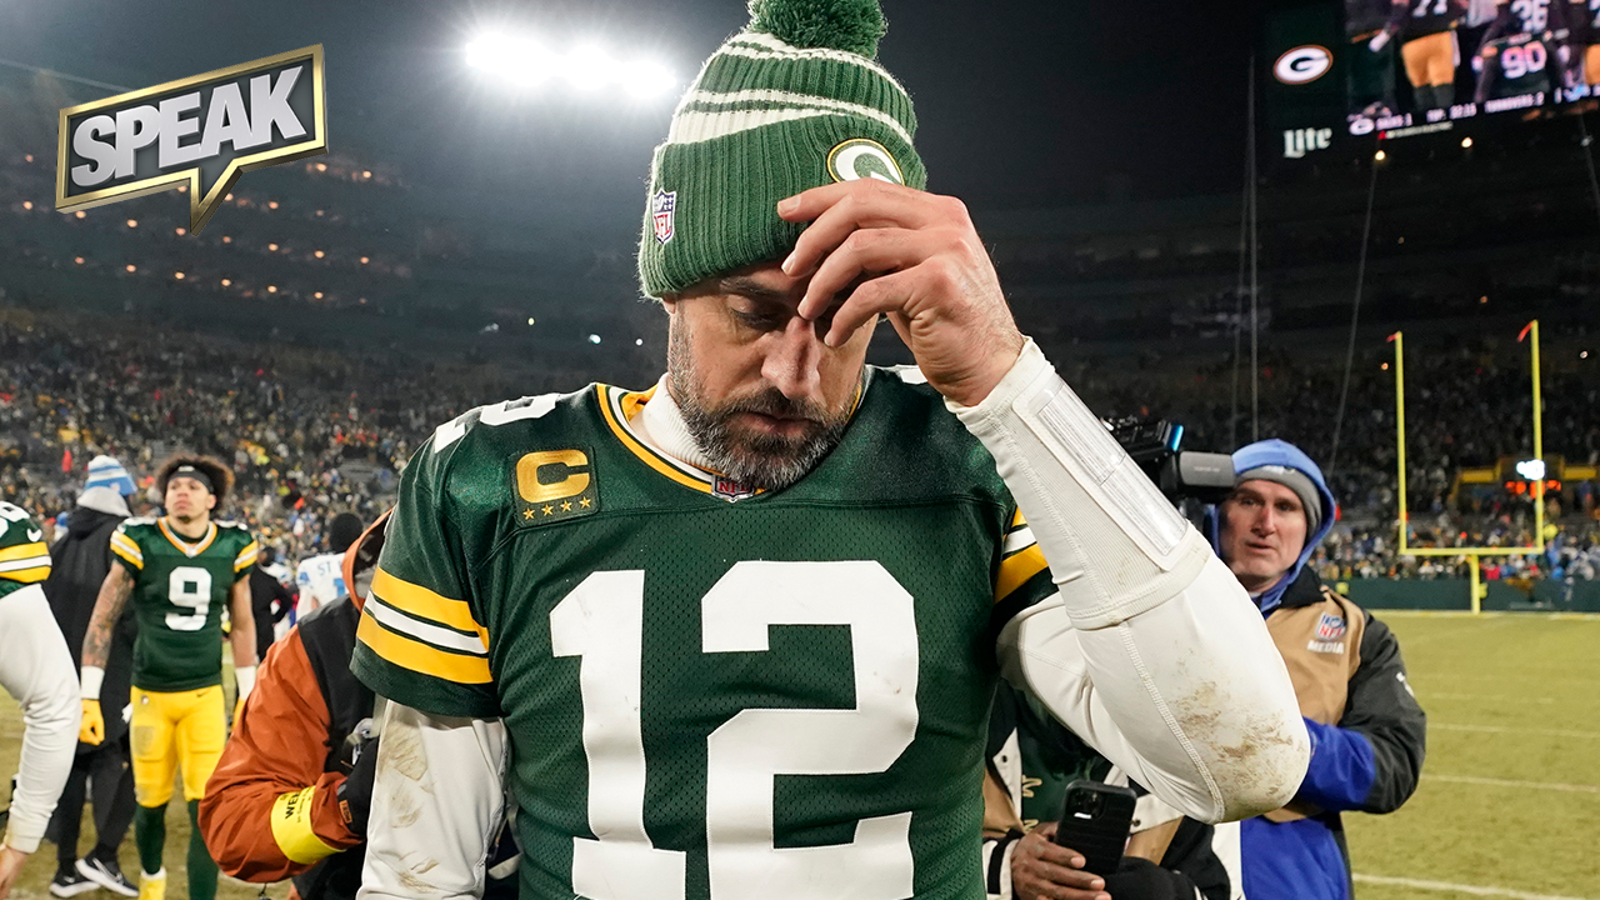 Does Aaron Rodgers deserve blame for the Packers missing the playoffs?